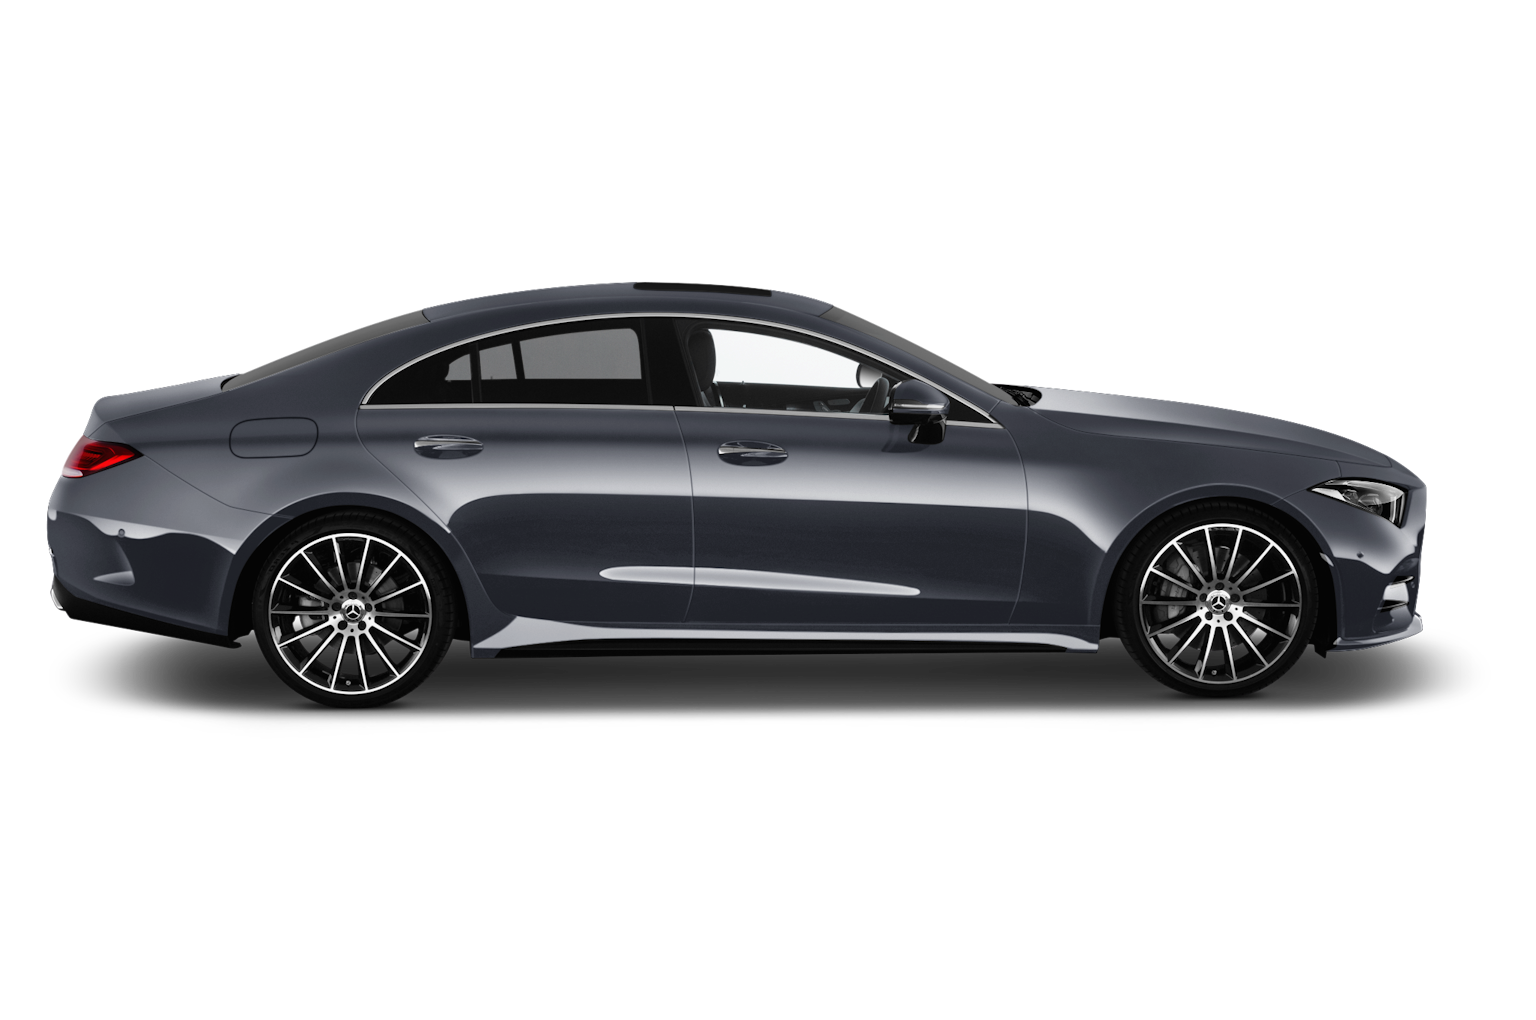 Mercedes CLS Lease deals from £640pm carwow